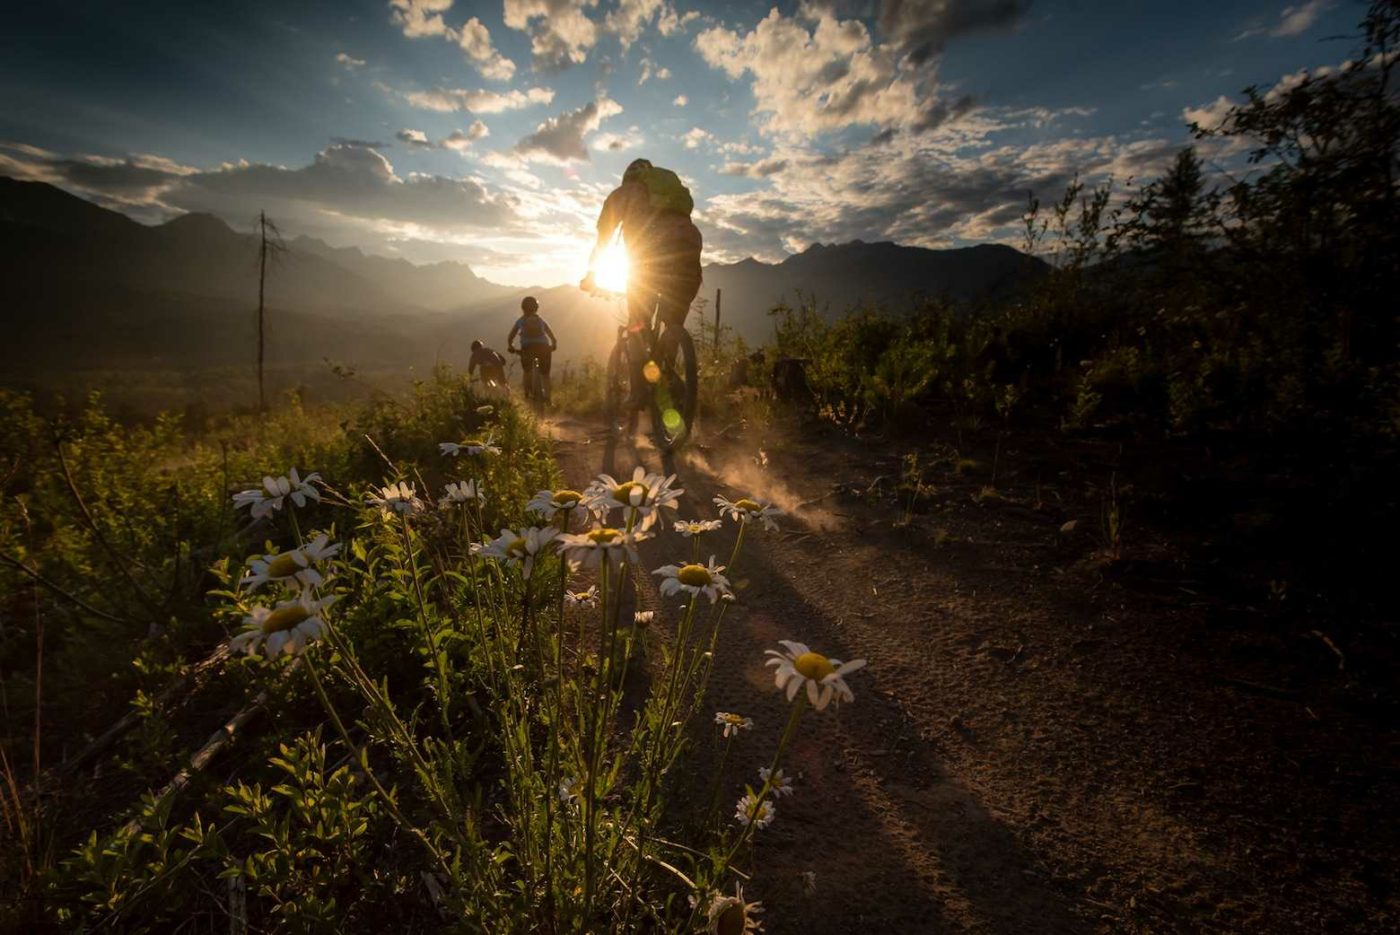 Three Mountain Bikers riding off into the sunset on dirt path with wildflowers at forefront of image